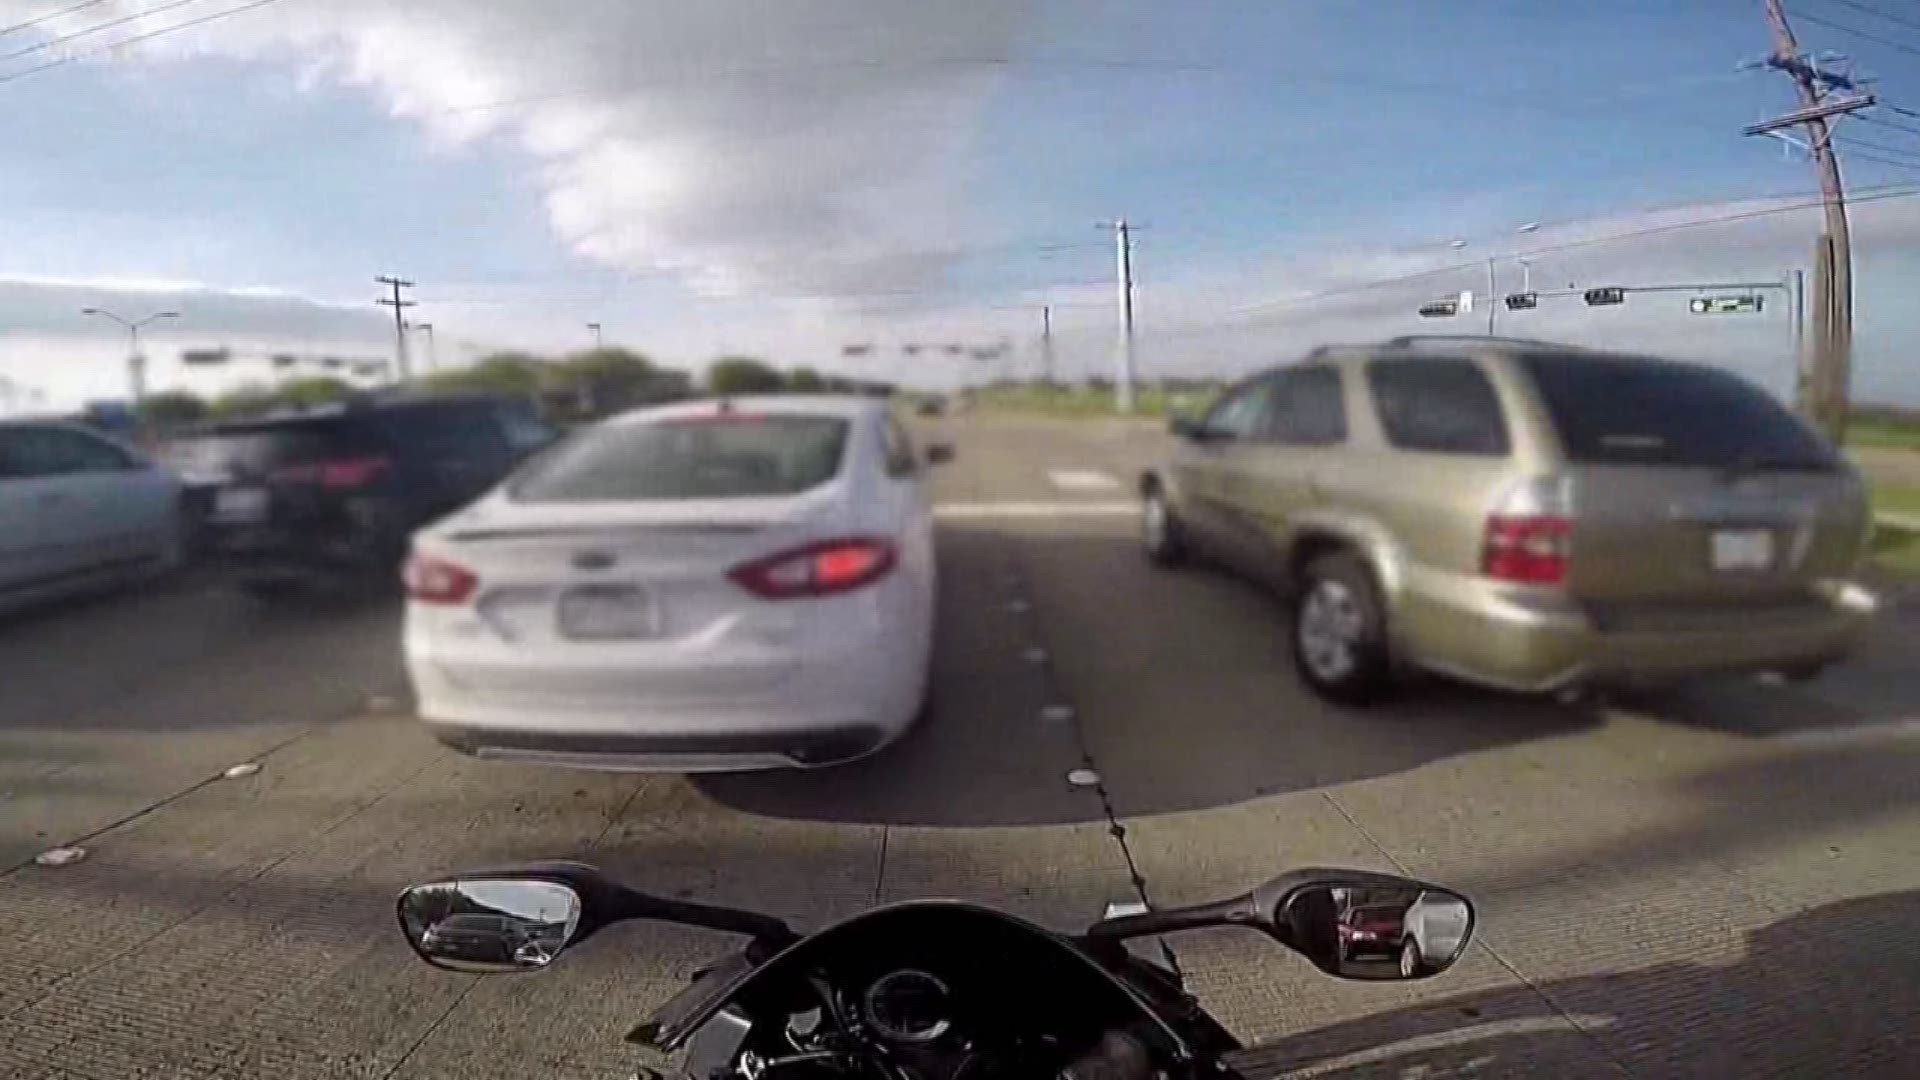 A video of a three-vehicle crash also involving a motorcycle crash in North Texas, is going viral. In a video link posted on Reddit, the Plano man is recording video with a camera while riding his motorcycle Saturday. He says no one left in an ambulance.